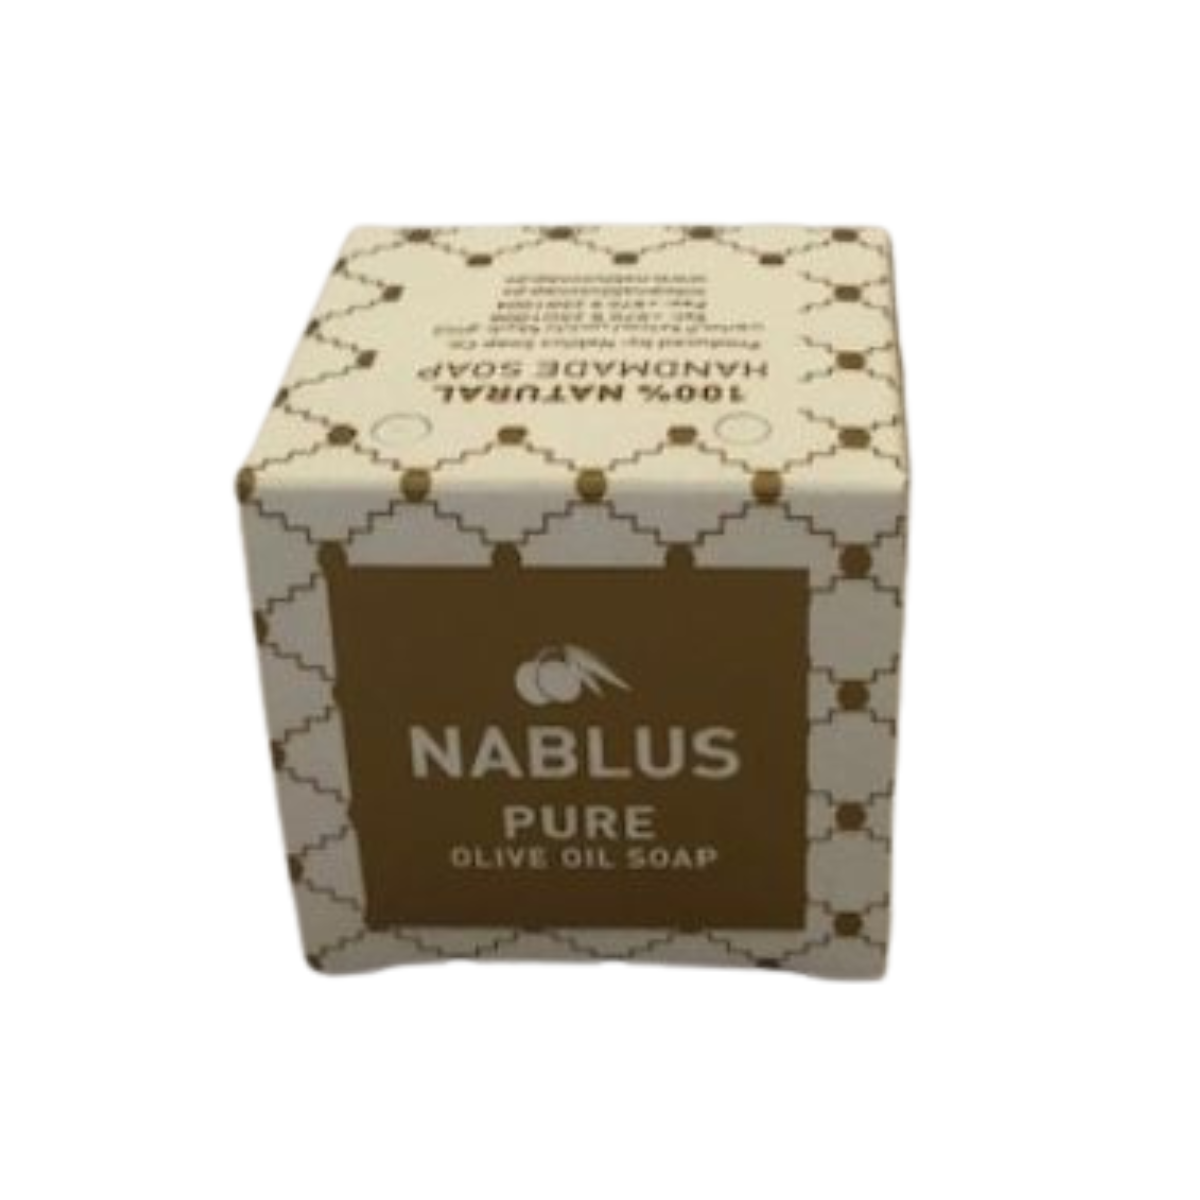 Olive Oil Soap from Nablus